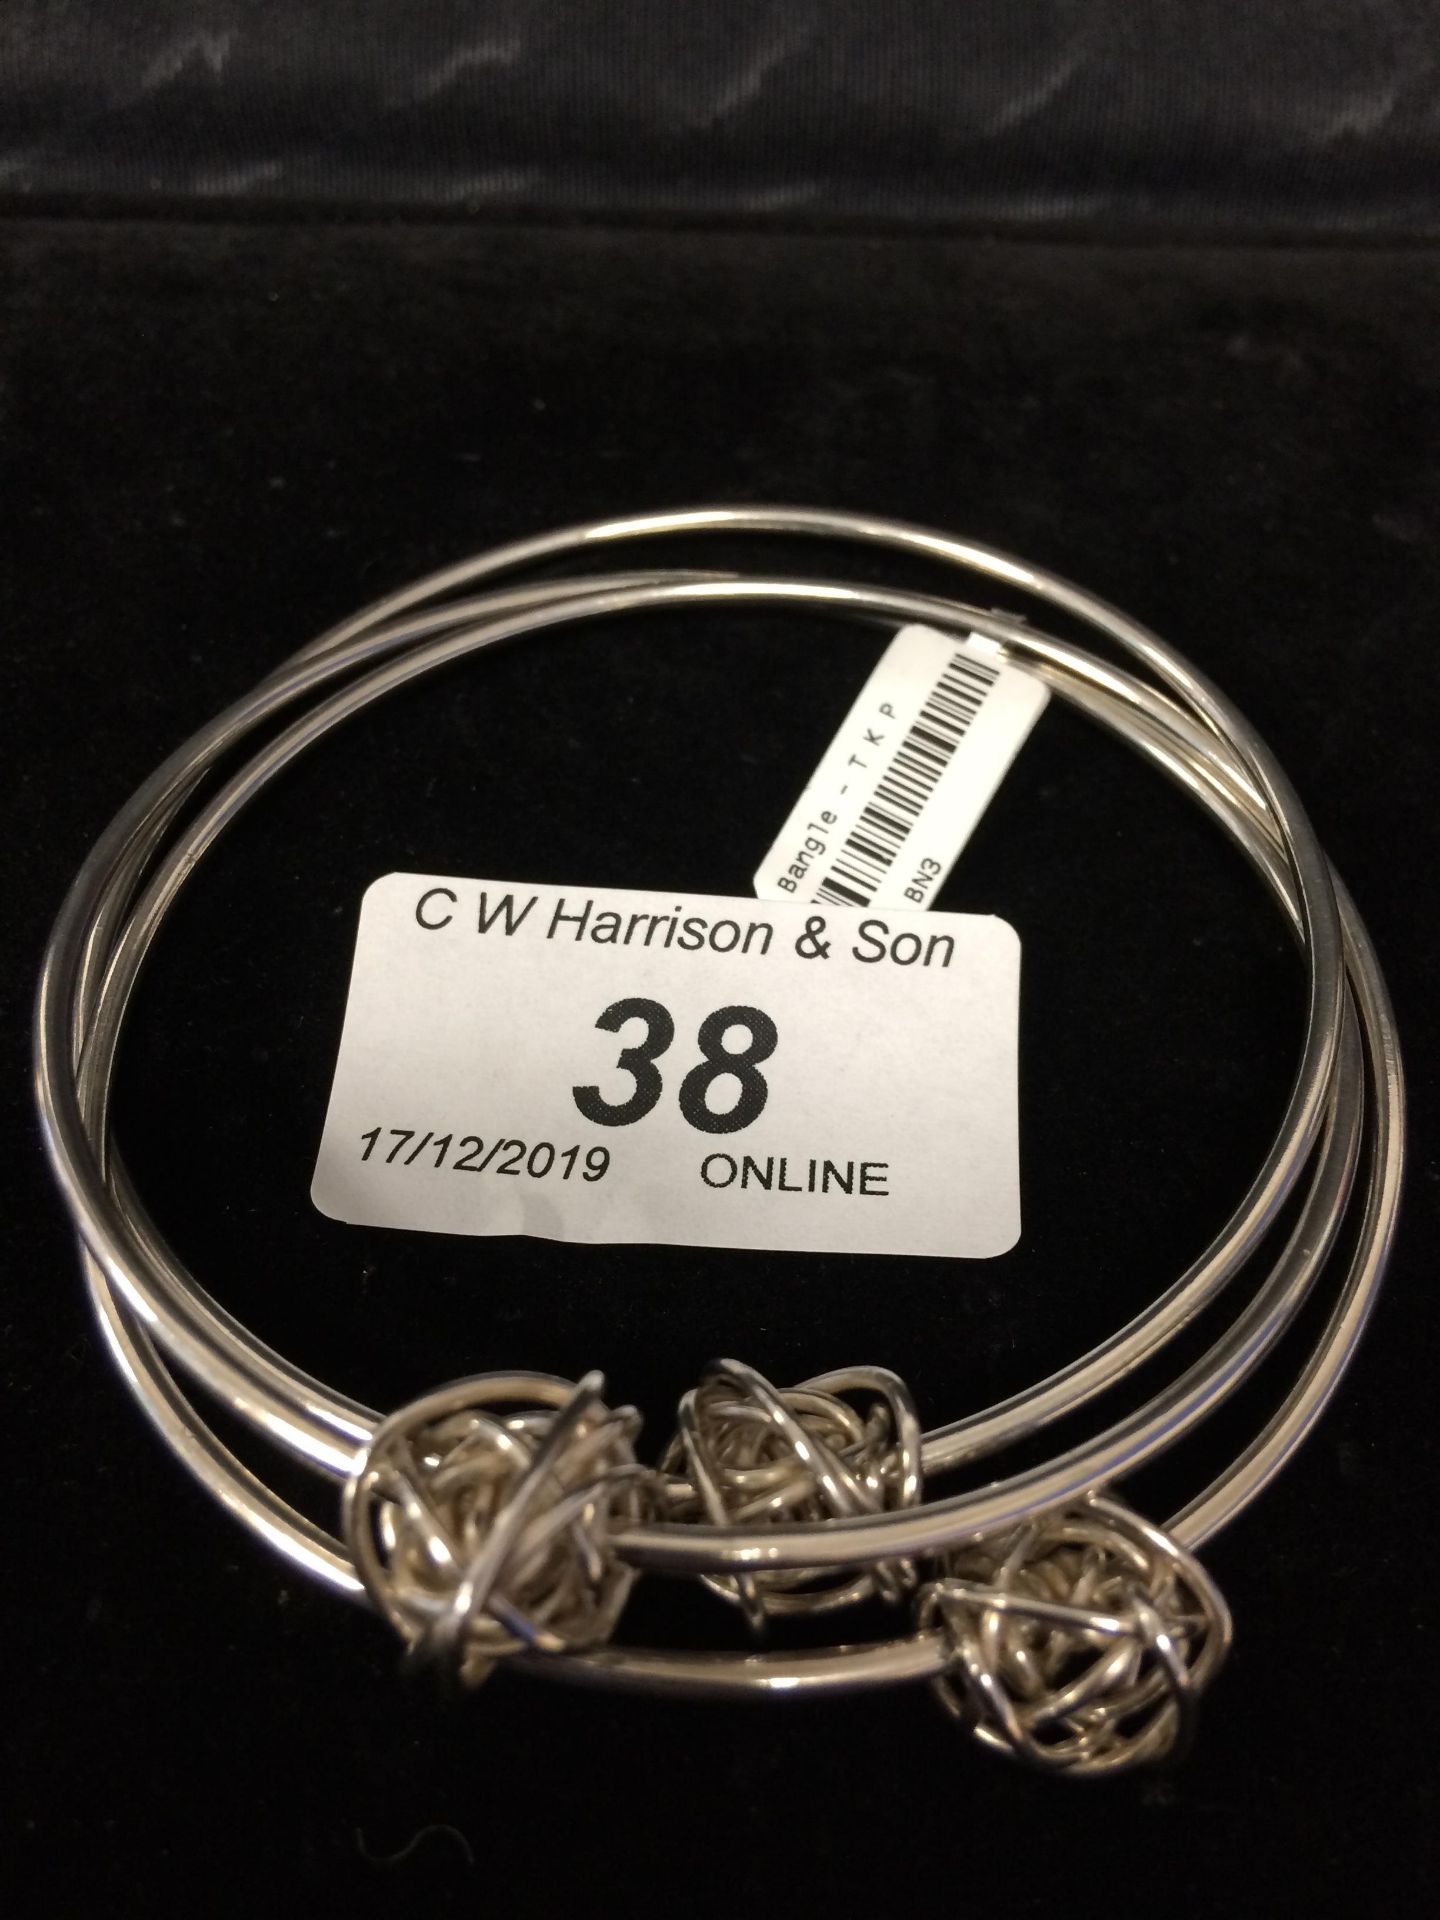 925 sterling silver 3 link ball bangle by Tara Kirkpatrick RRP £165 (please note this lot is - Image 3 of 3